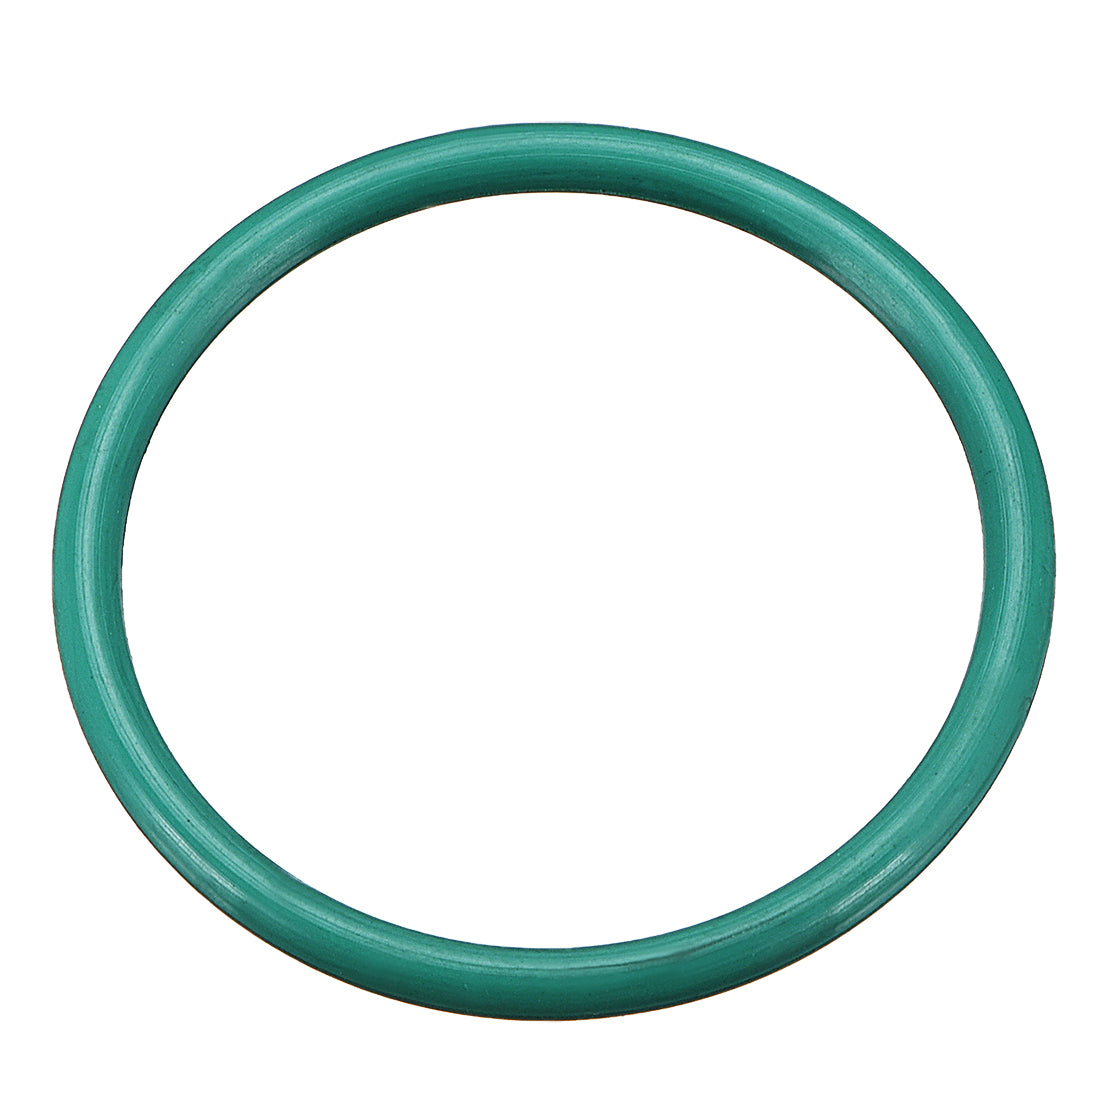 uxcell Uxcell O-Rings Fluorine Rubber 40mm x 45.3mm x 2.65mm Seal Rings Sealing Gasket